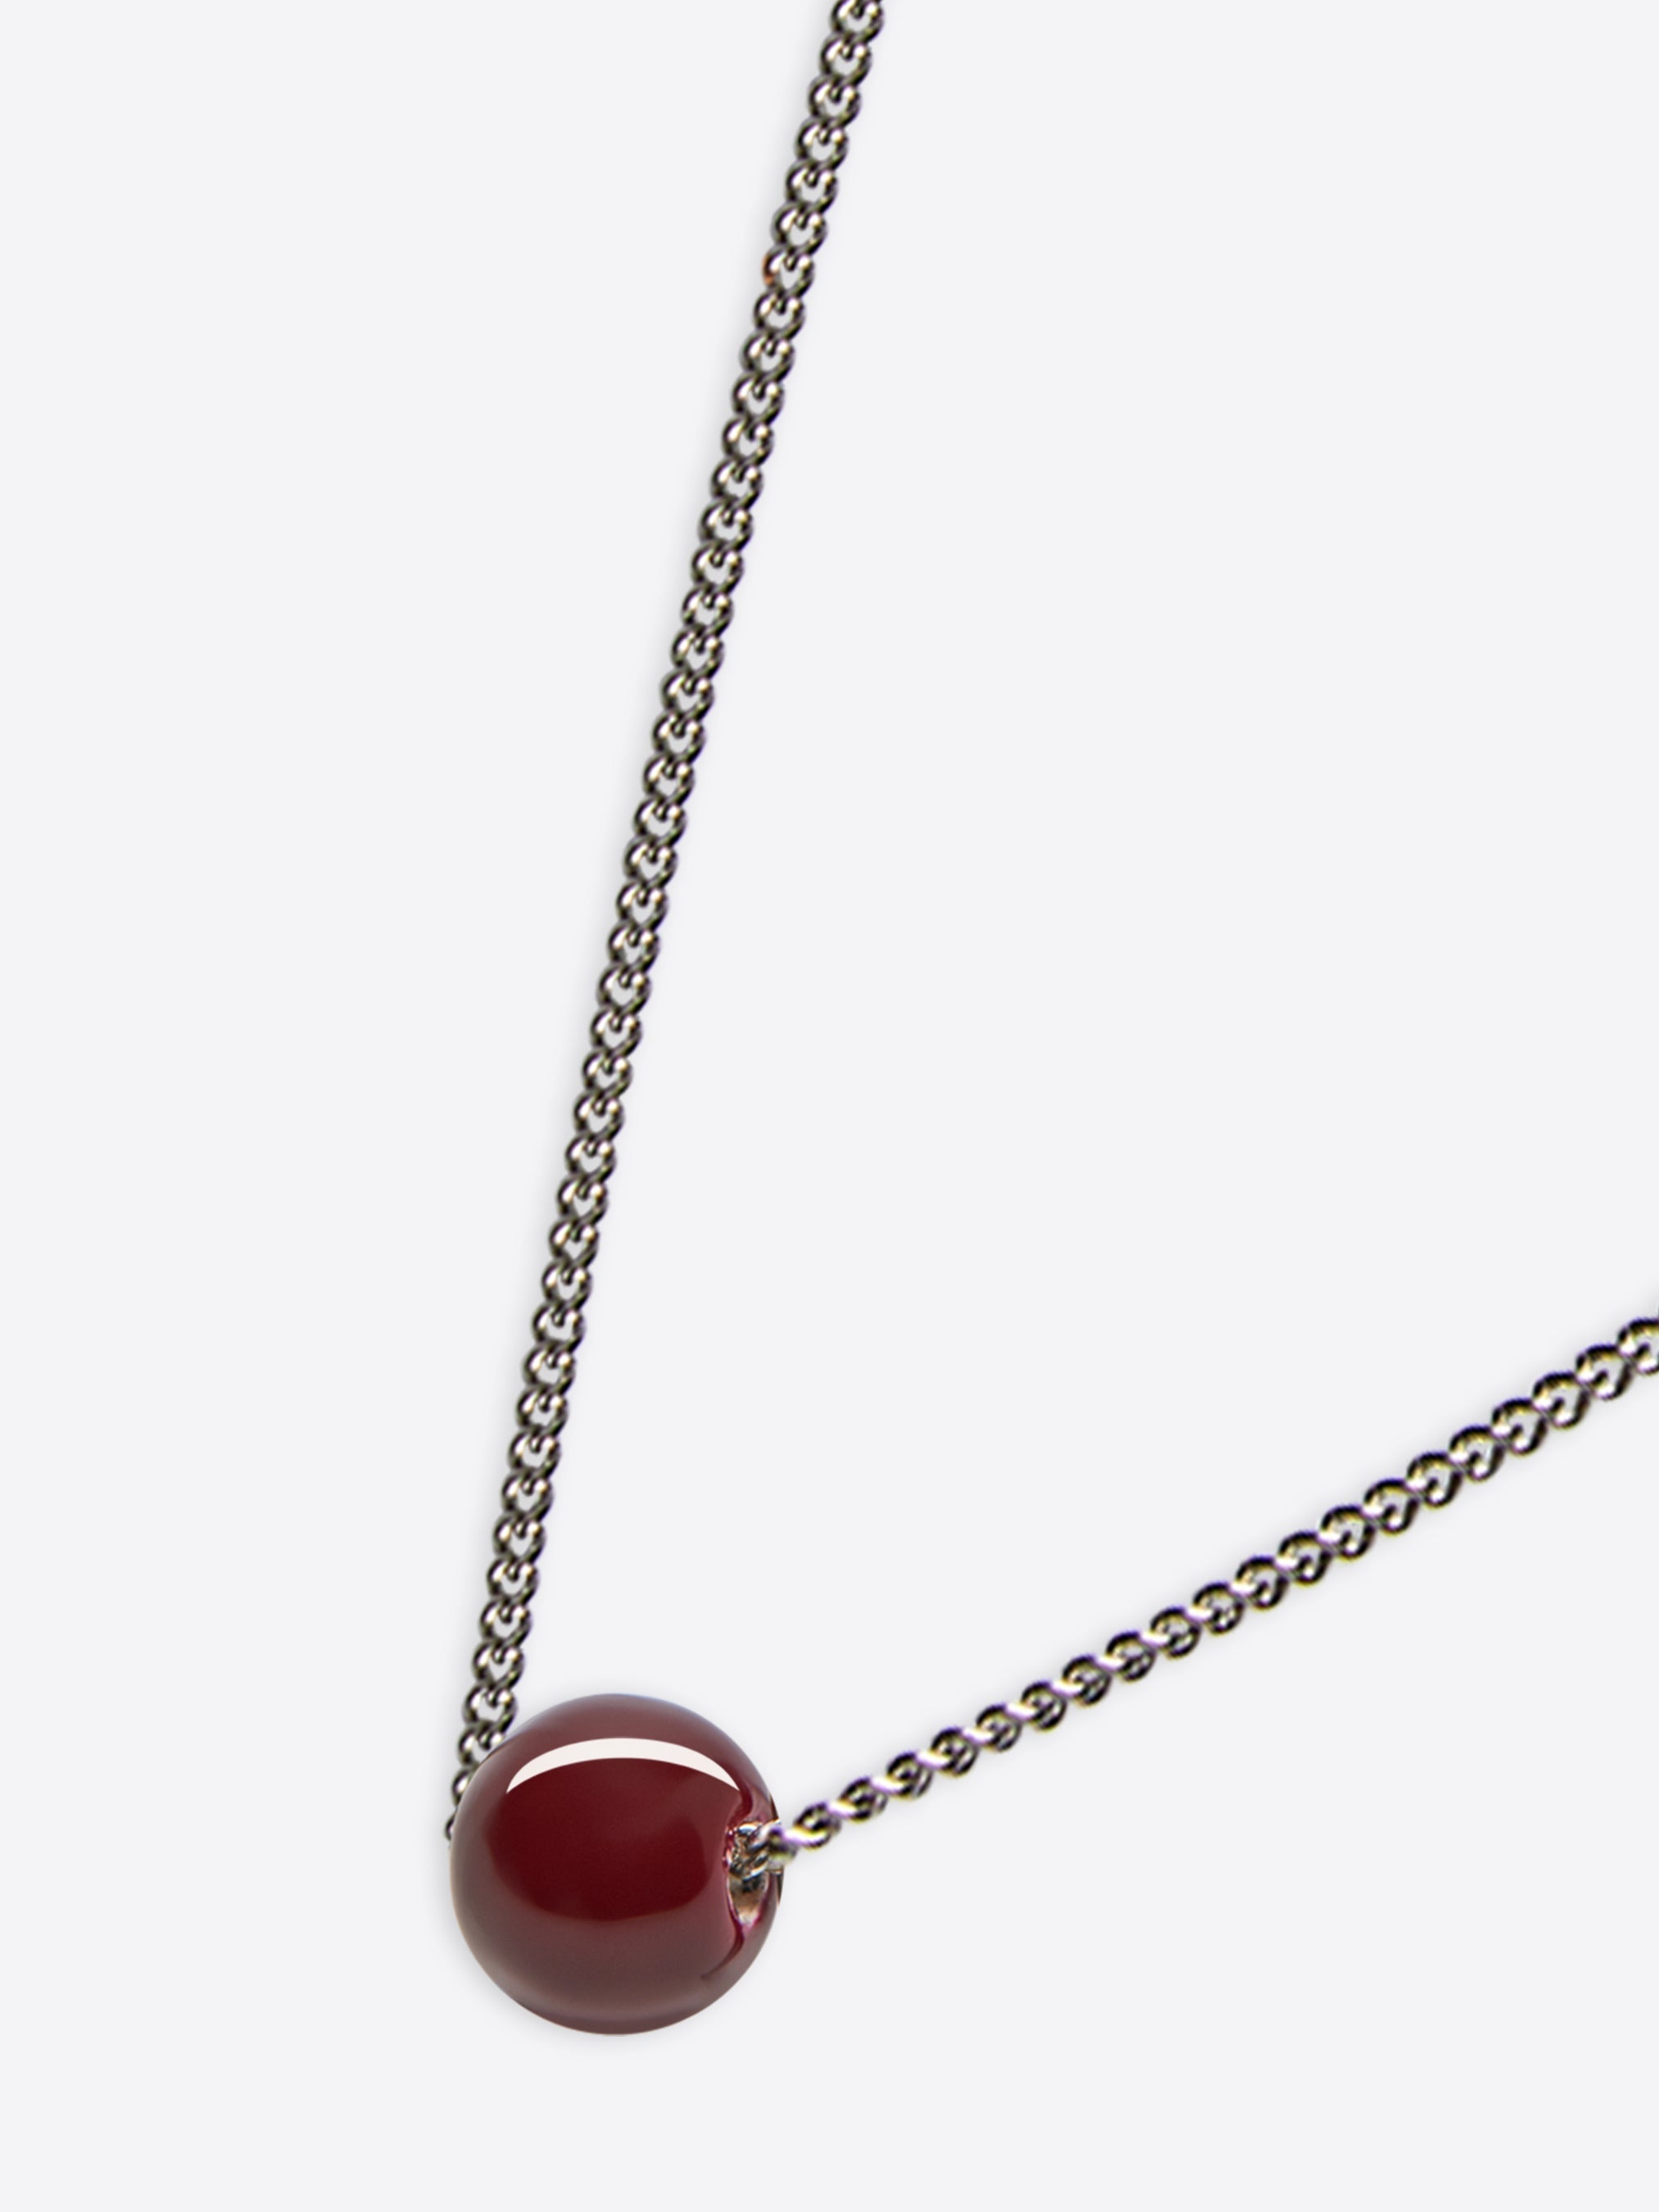 BALL NECKLACE - 2